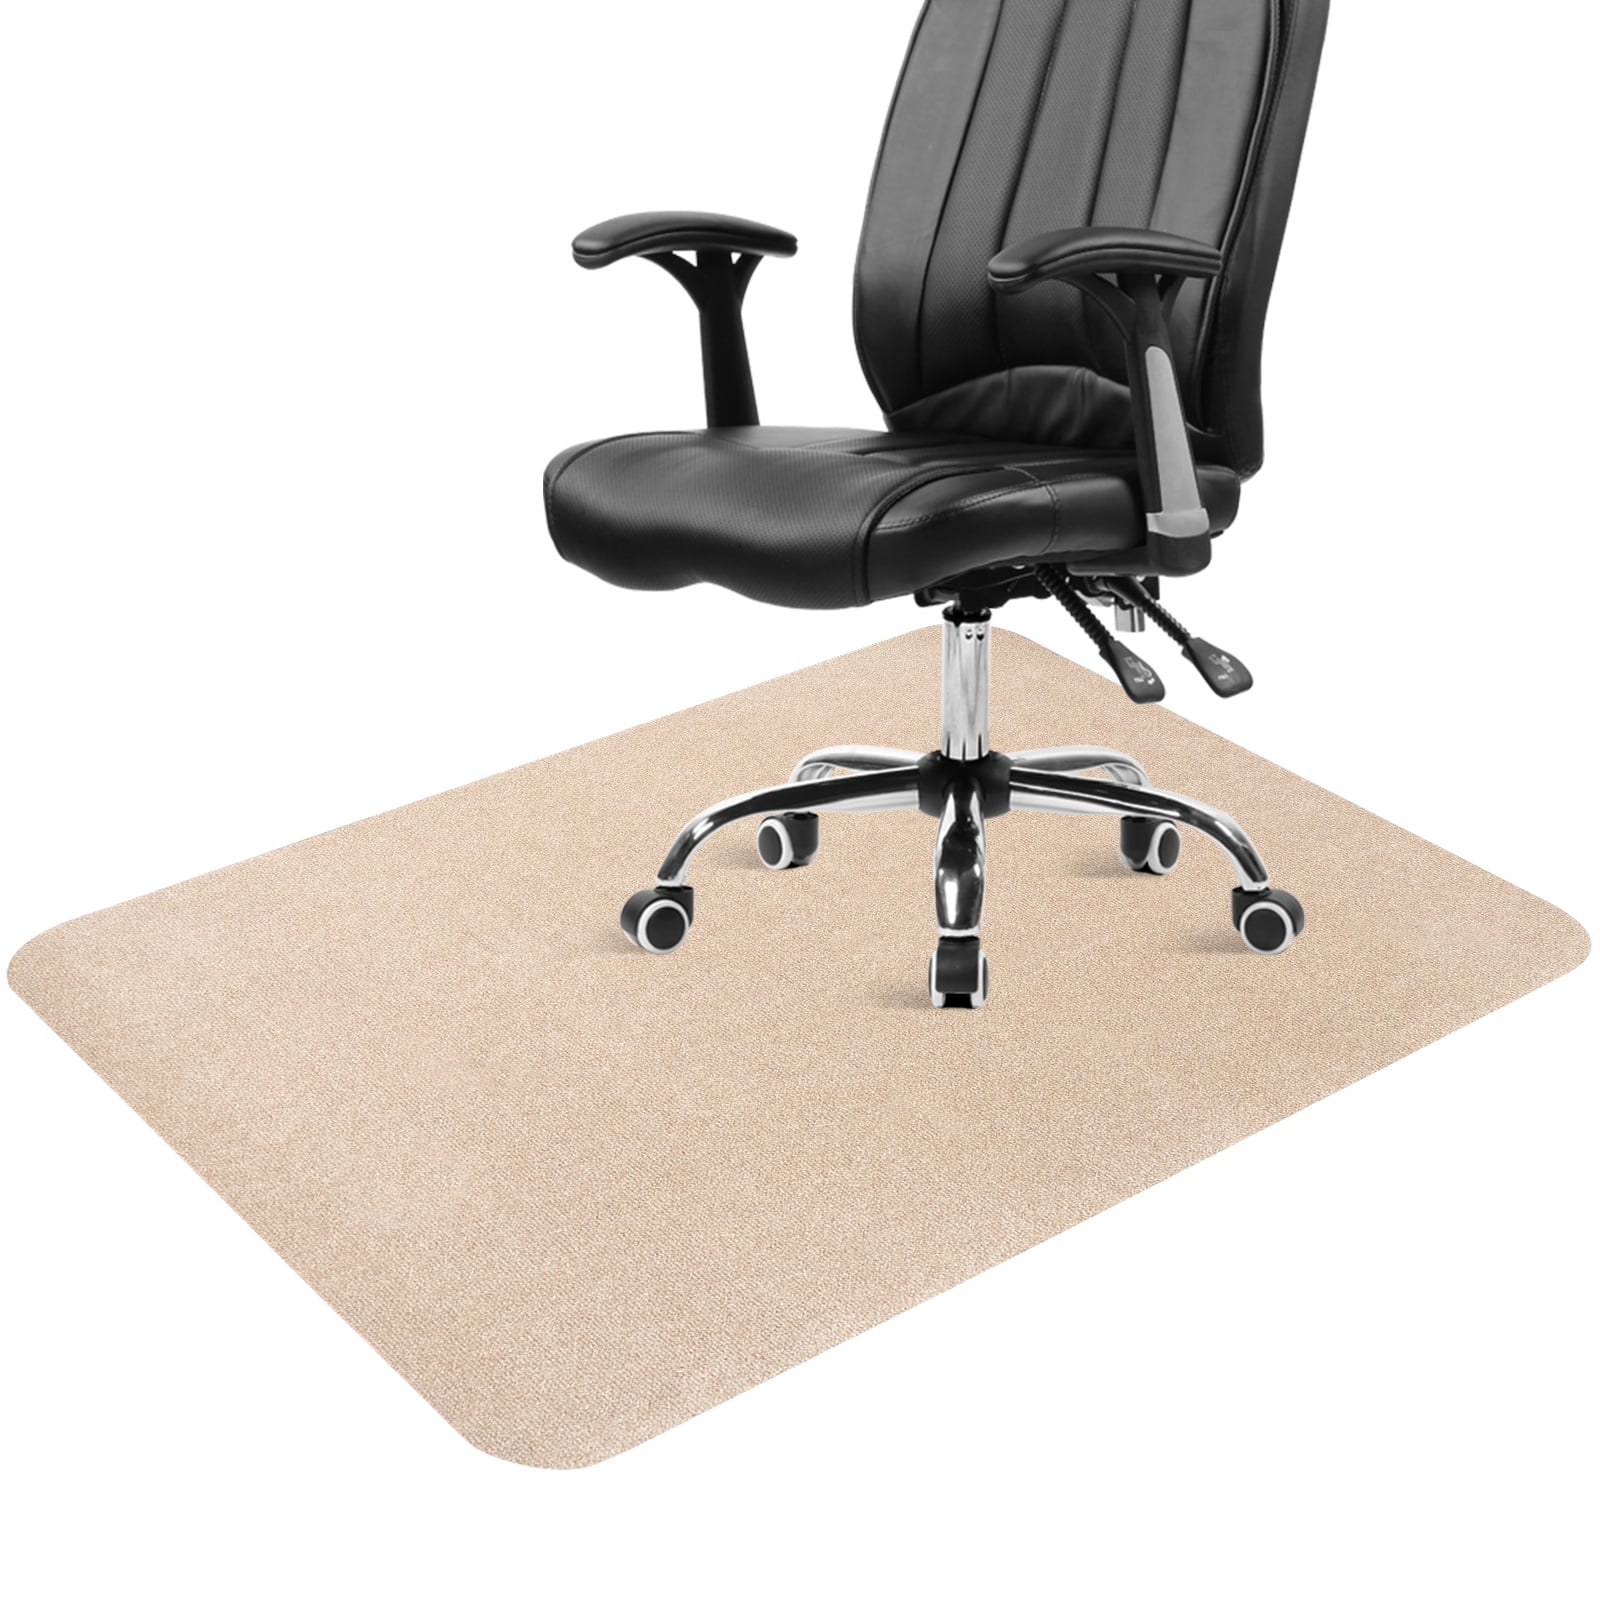 Hoe dan ook cafetaria Sta op ANMINY Office Chair Mat for Hardwood Floor 36" x 48" Desk Chair Mat for  Carpet Non-Slip Home Office Protector in Living Room Study Office， Green -  Walmart.com